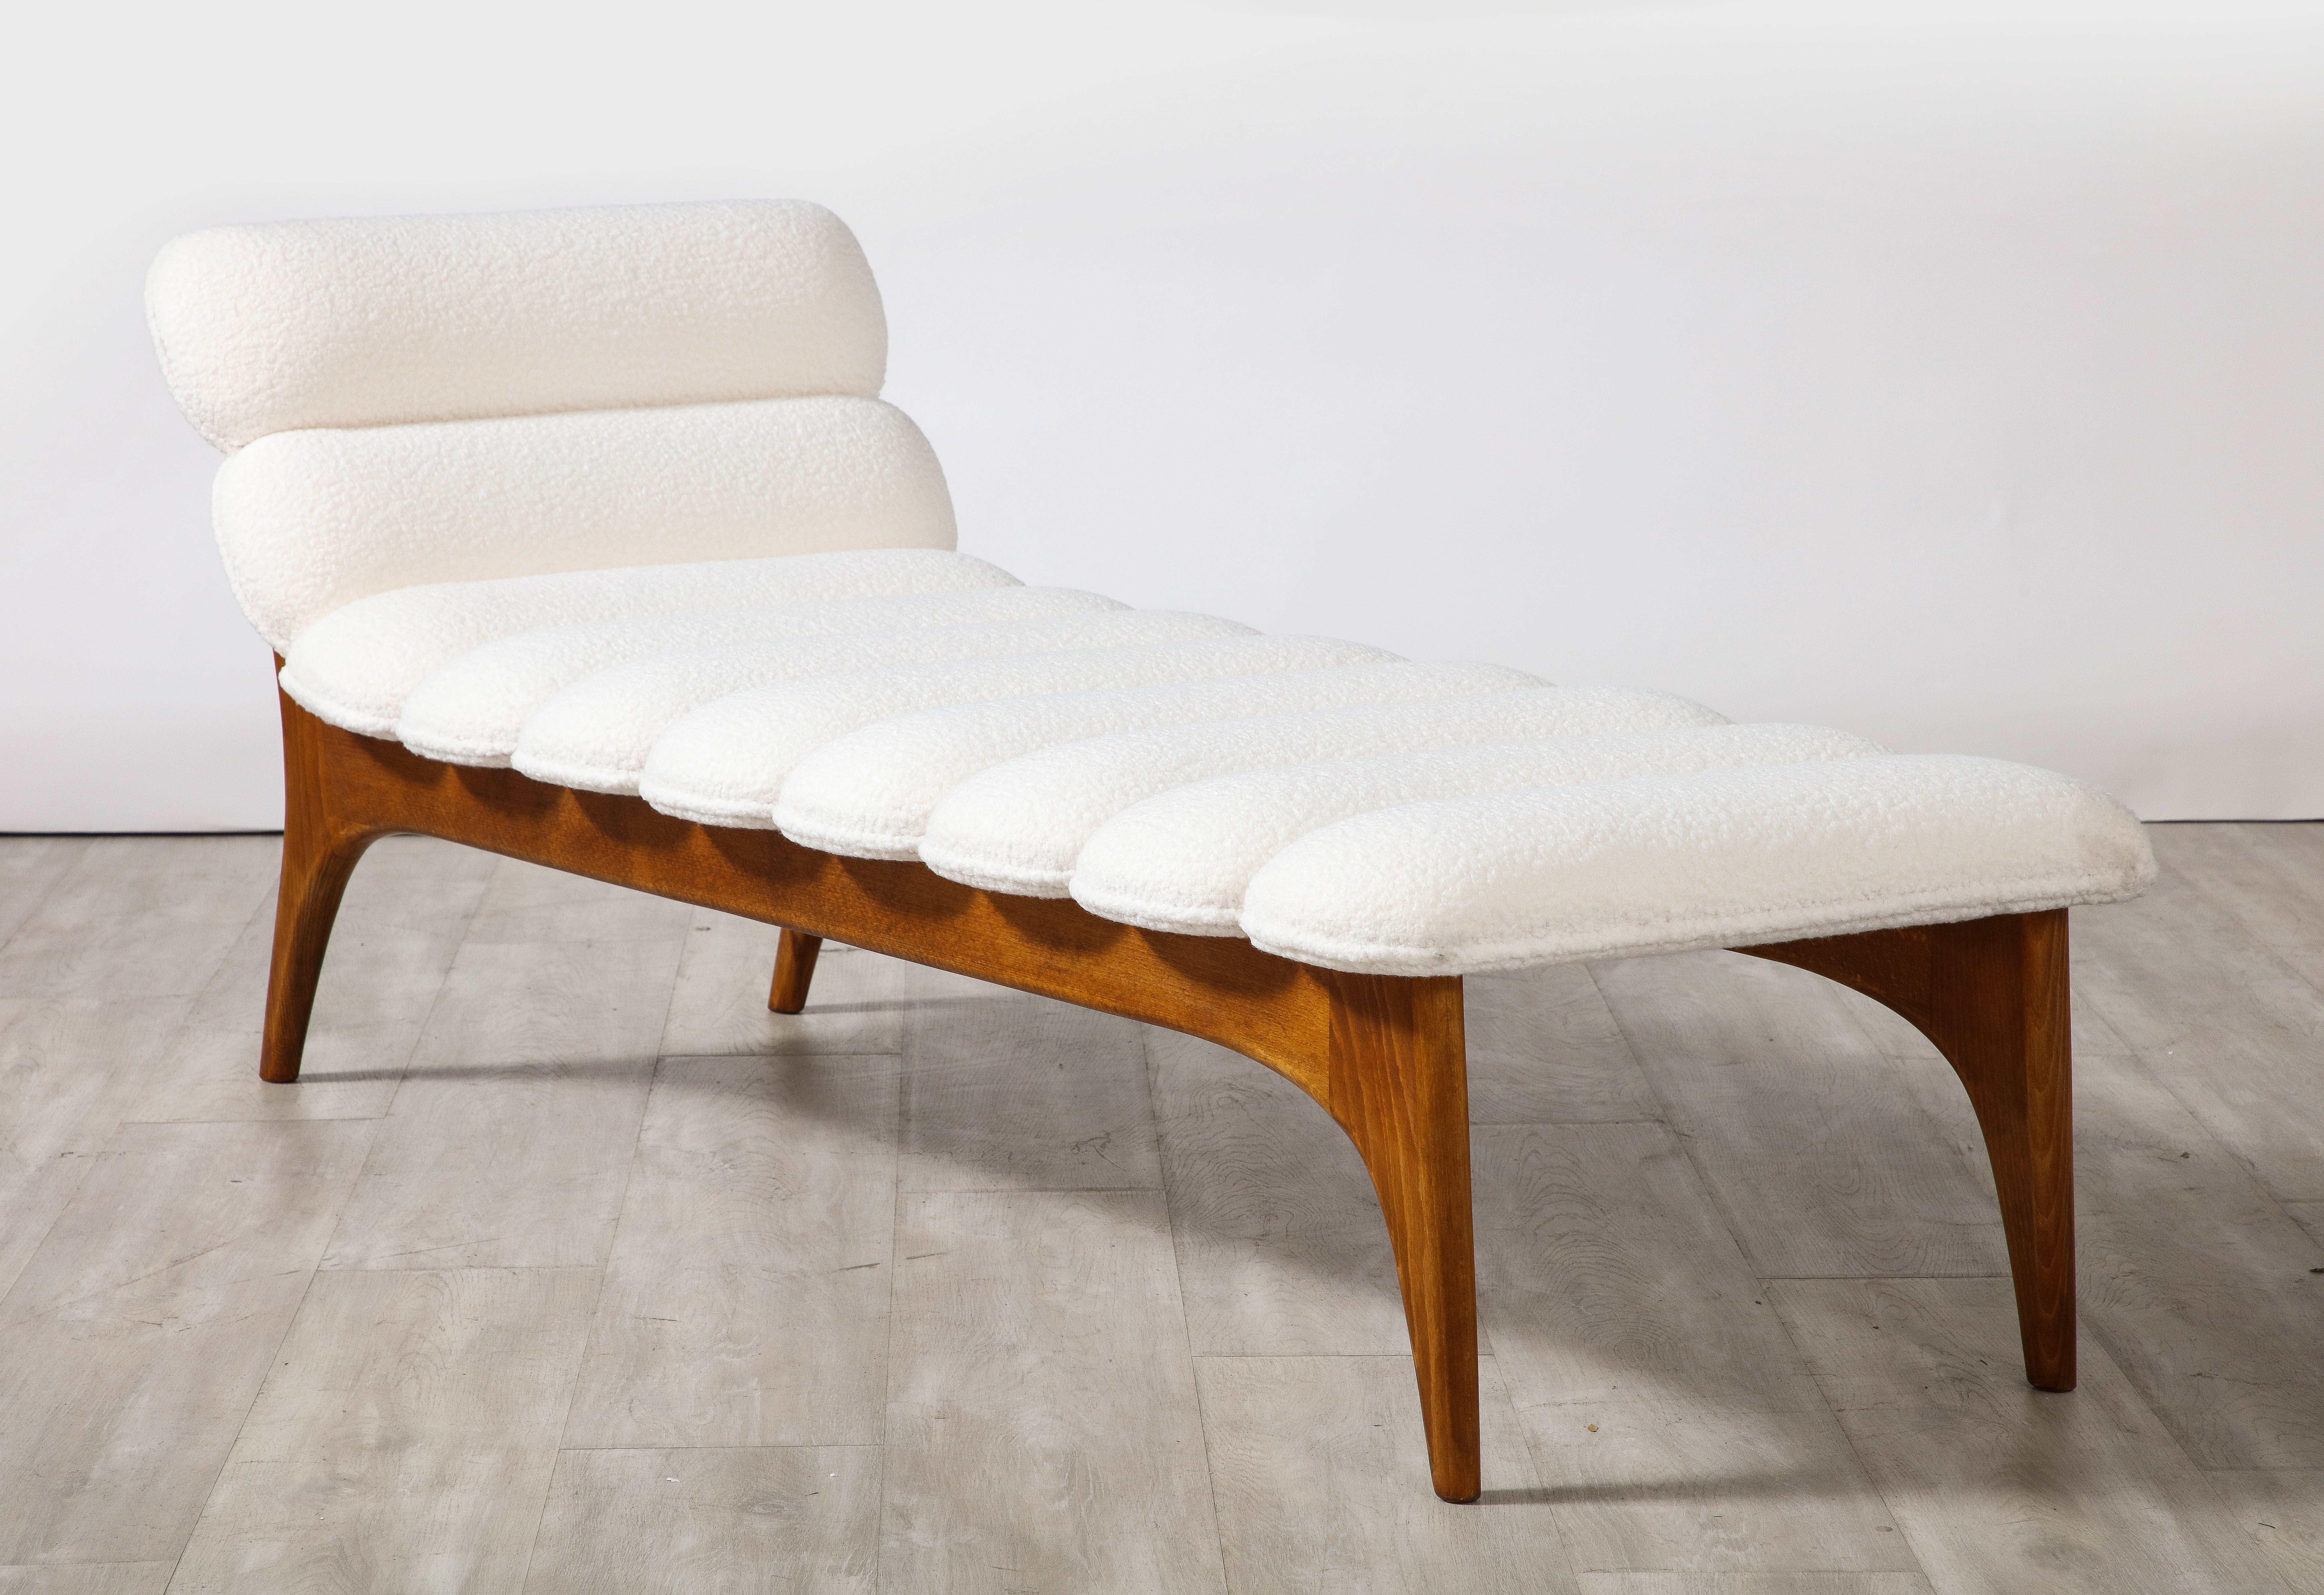 Italian contemporary walnut and channel tufted chaise longue or daybed with headrest. The whole with channel tufting in a rich creamy Italian bouclette. Highly sculptural and elegant with splayed legs. A striking and classic addition to any interior